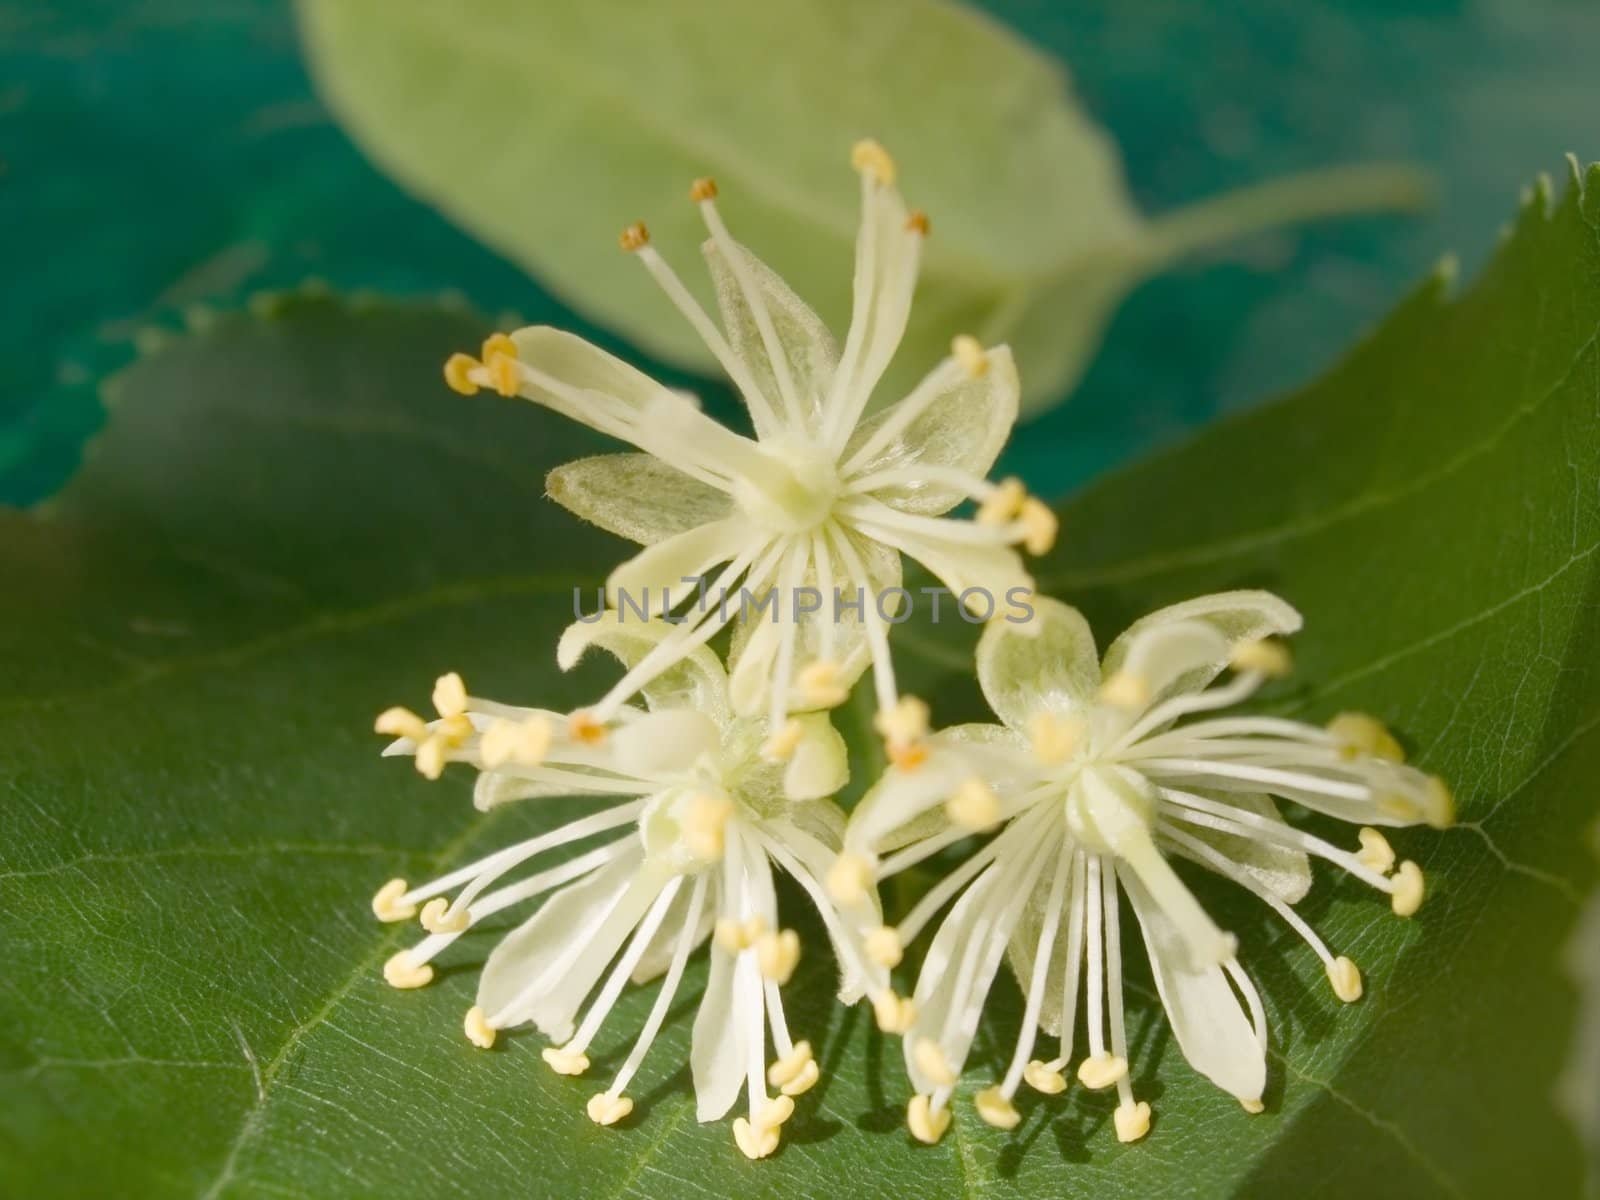 Flowers of a linden